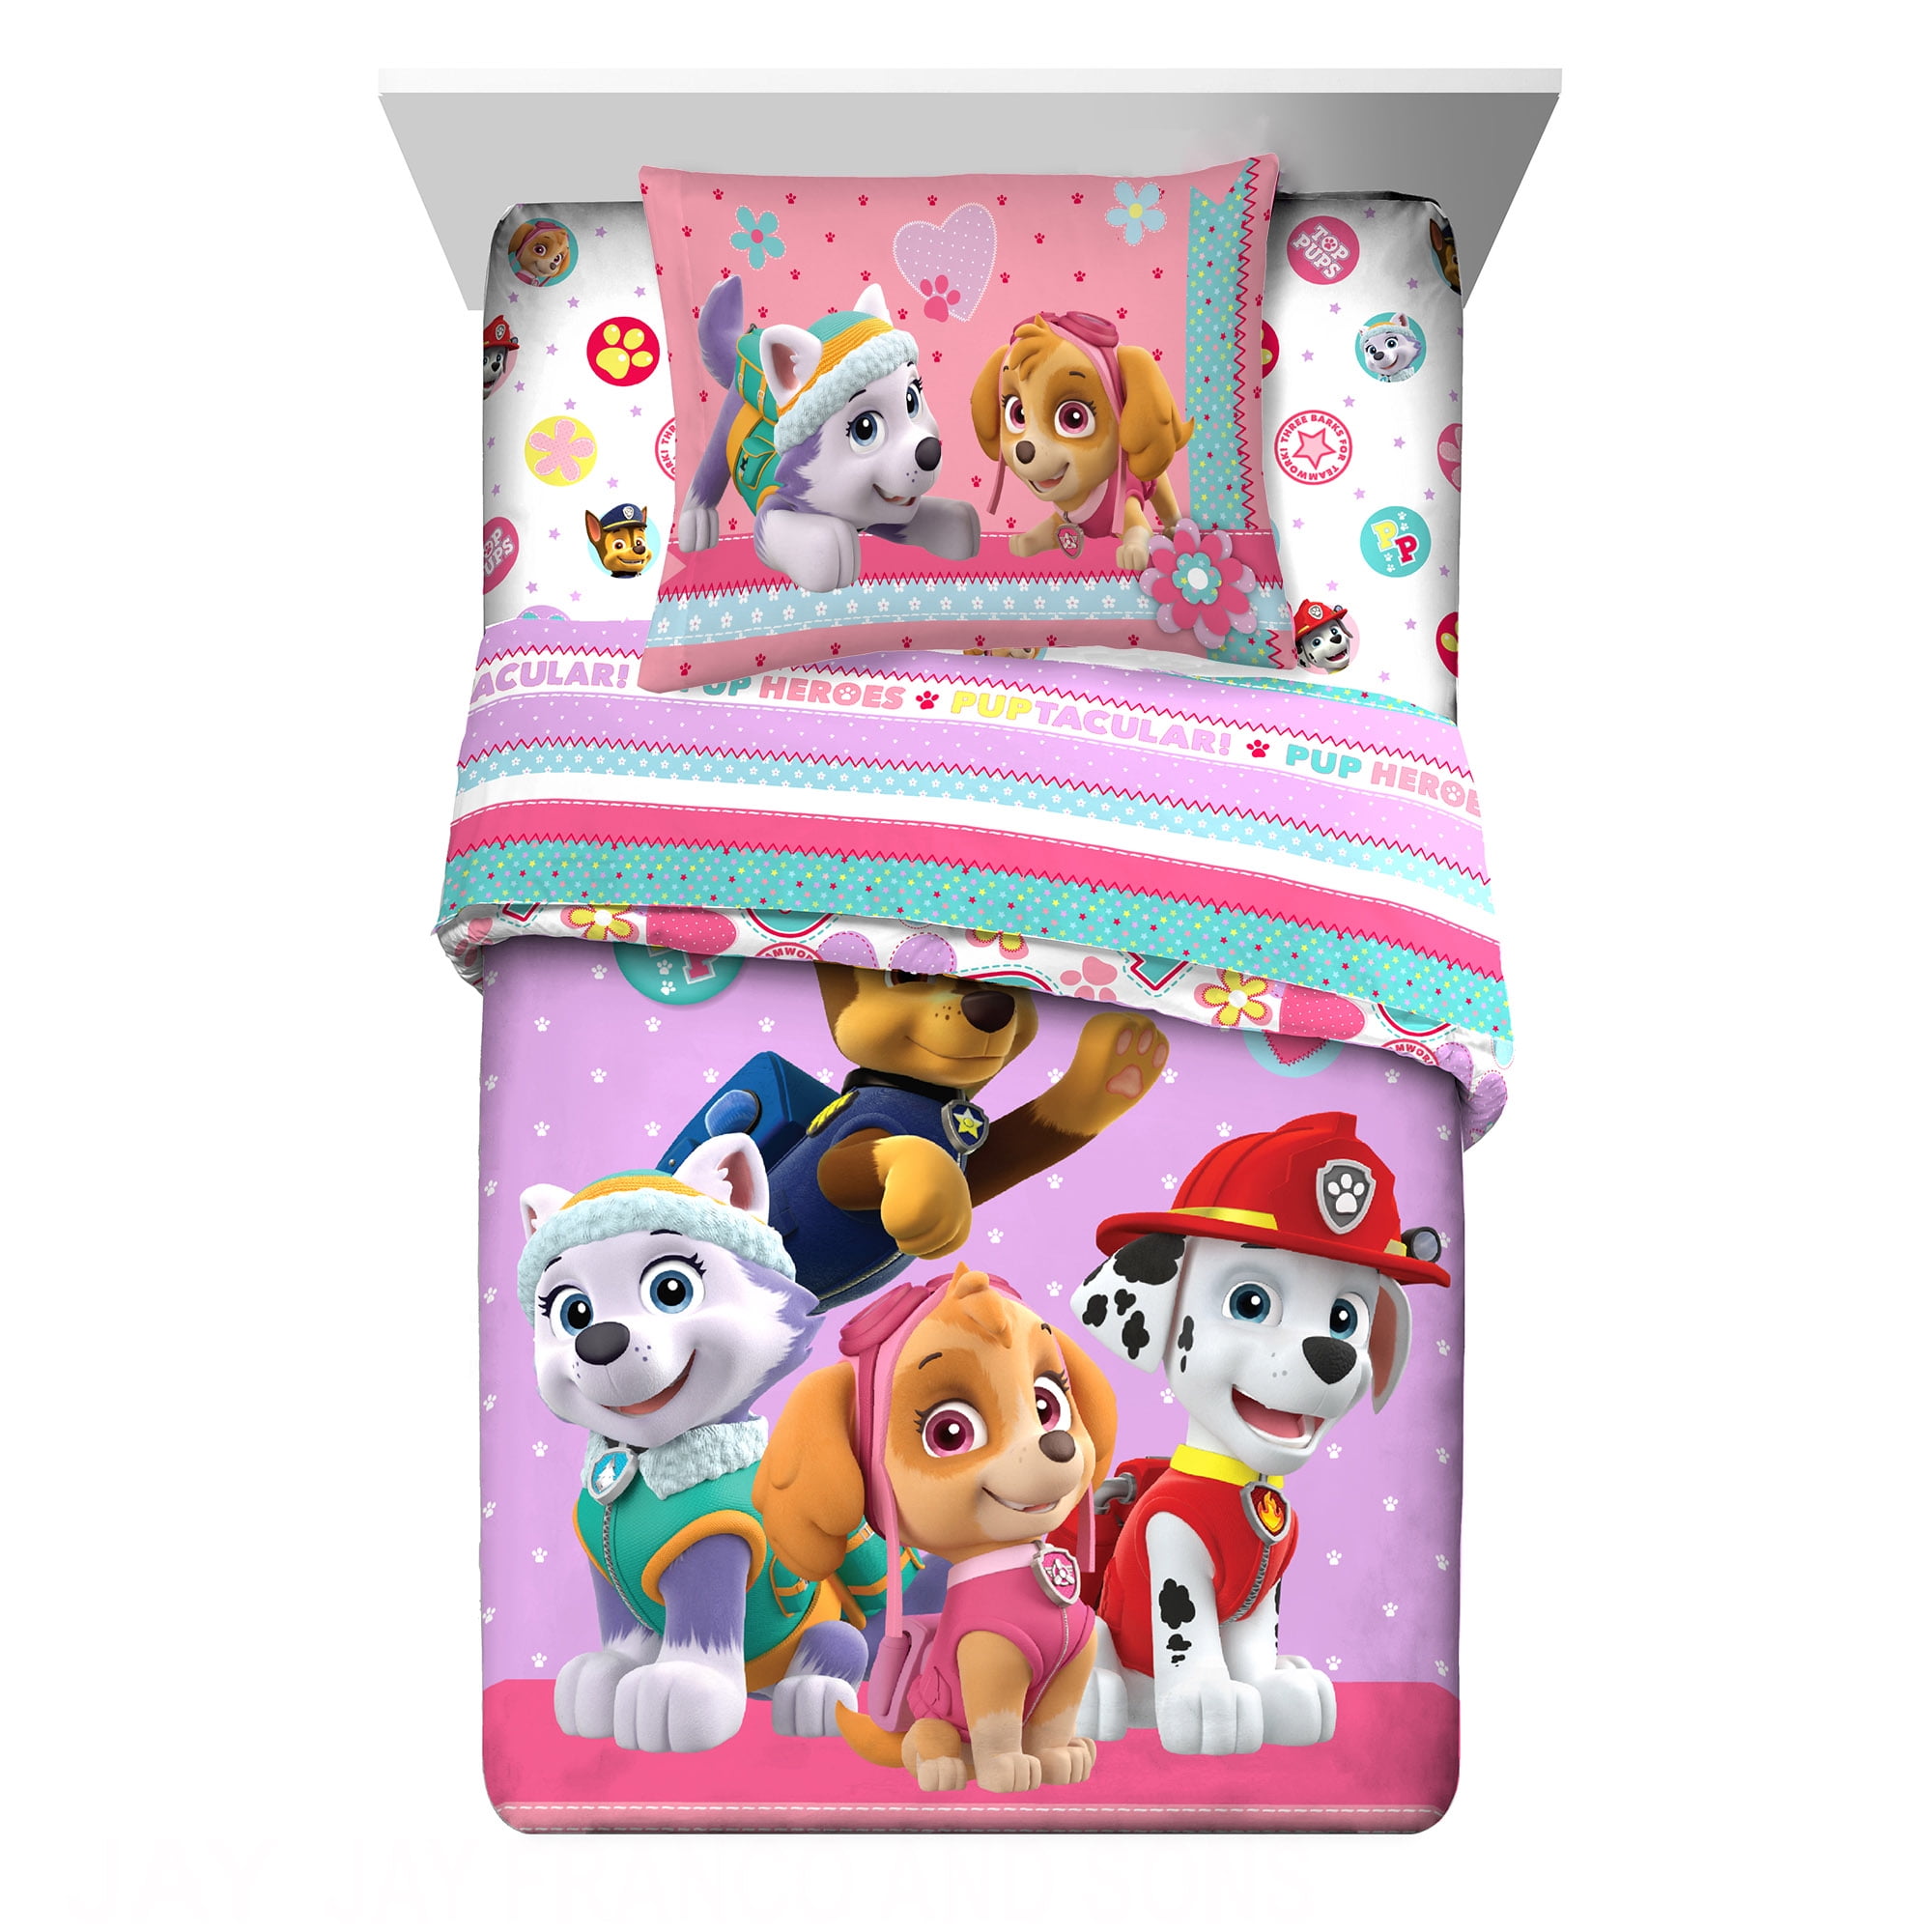 Paw Patrol Easy ABC Single/US Twin Bed Quilt Doona Duvet Cover set 